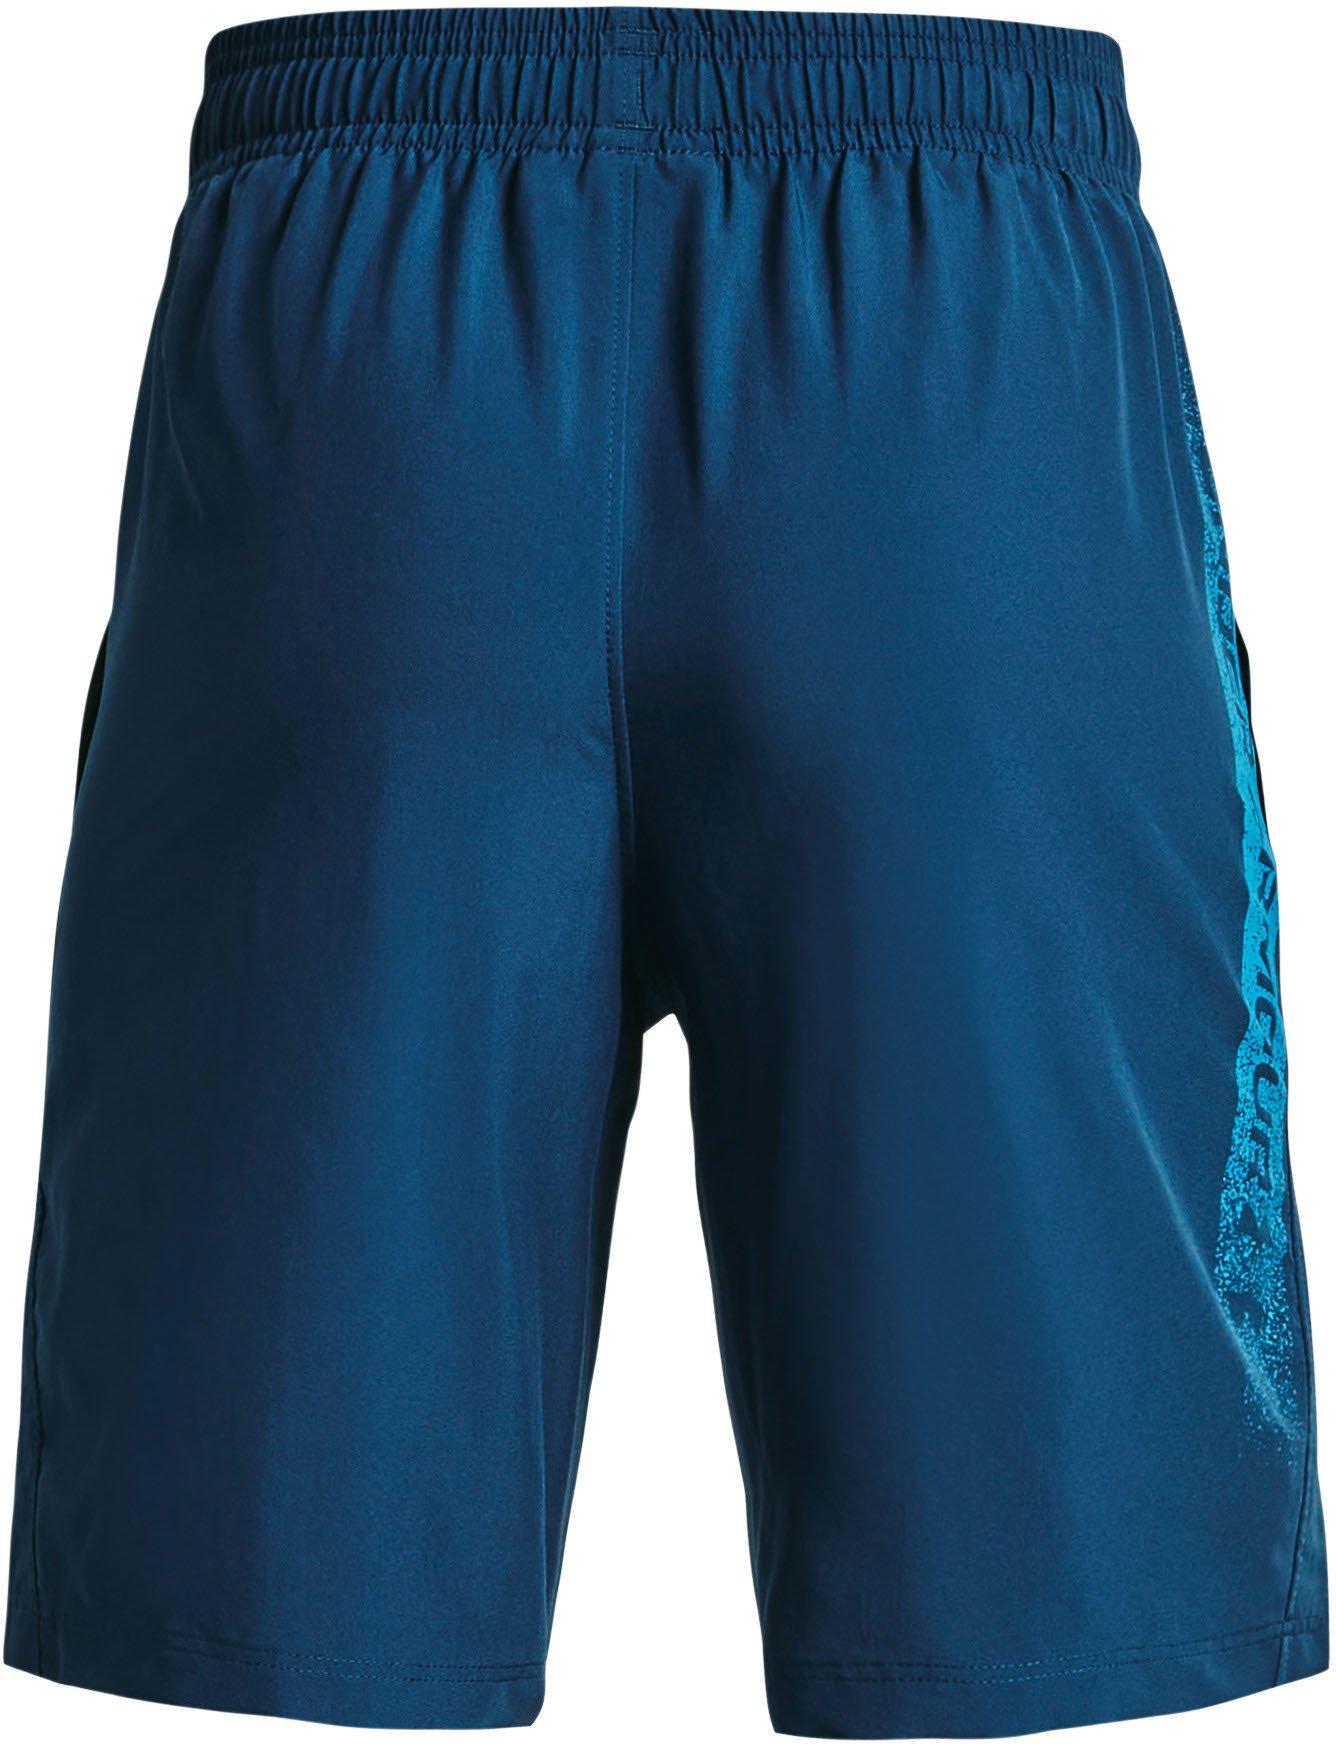 Under Armour Woven Graphic Shorts-BLU L